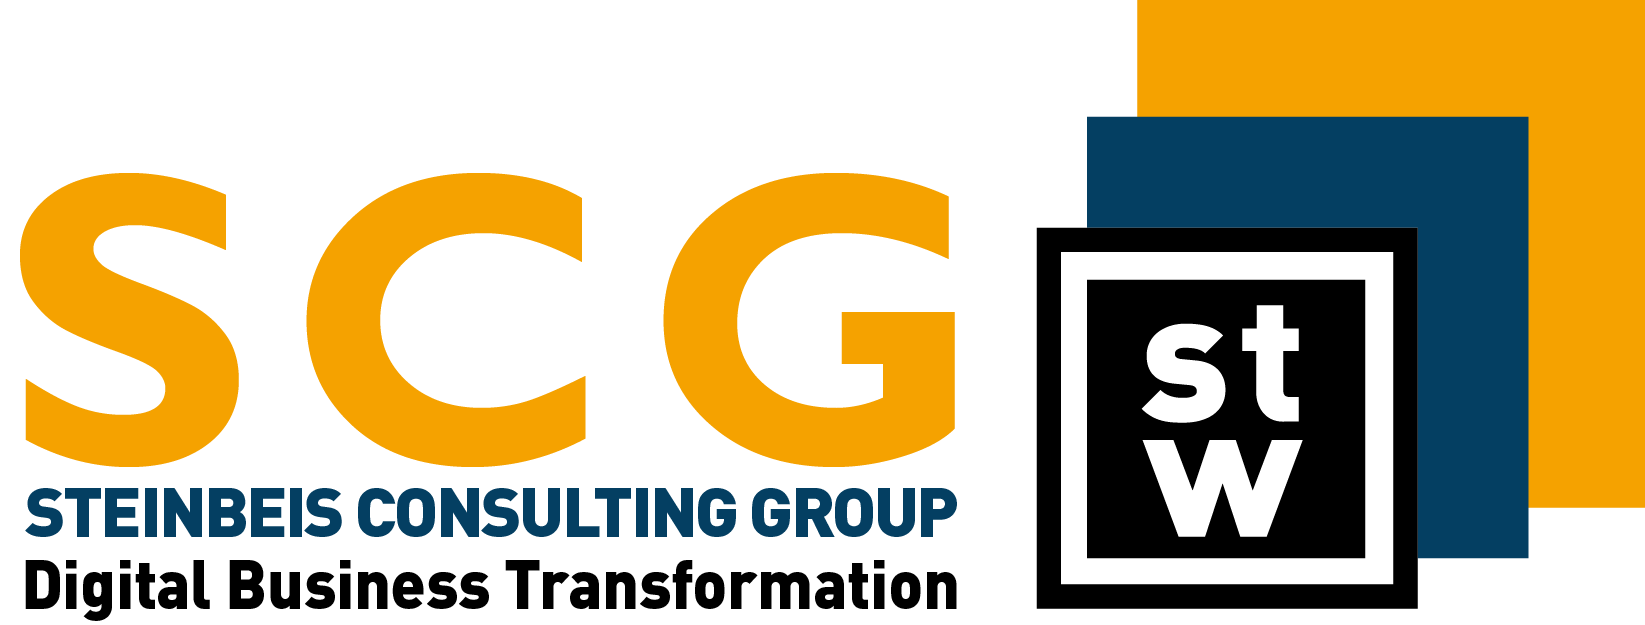 Logo Steinbeis Consulting Group Digital Business Transformation